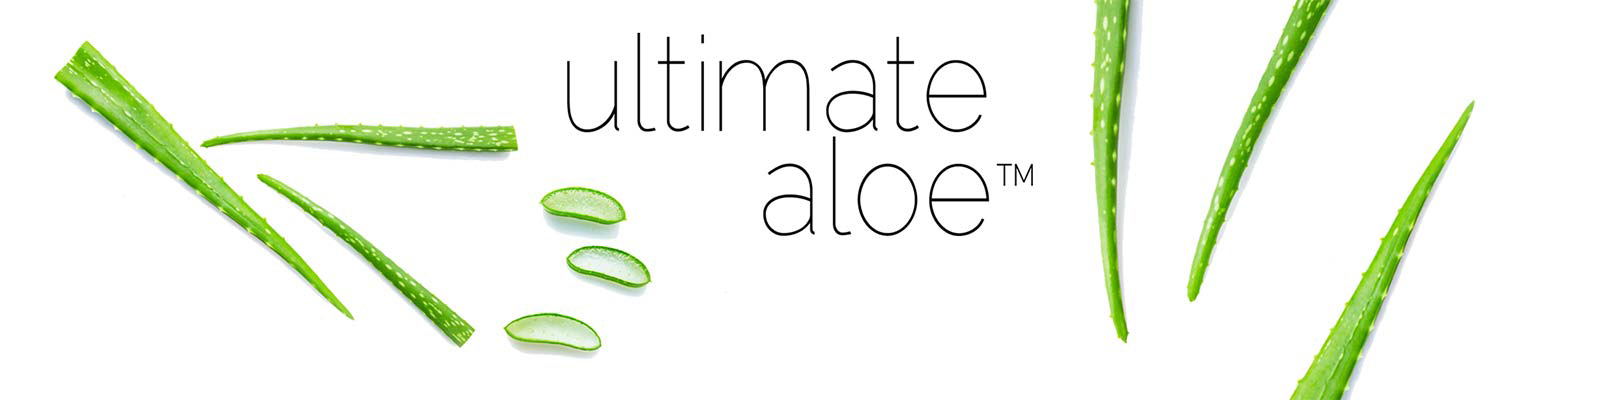 Ultimate Aloe, Get all the Ultimate aloe facts.